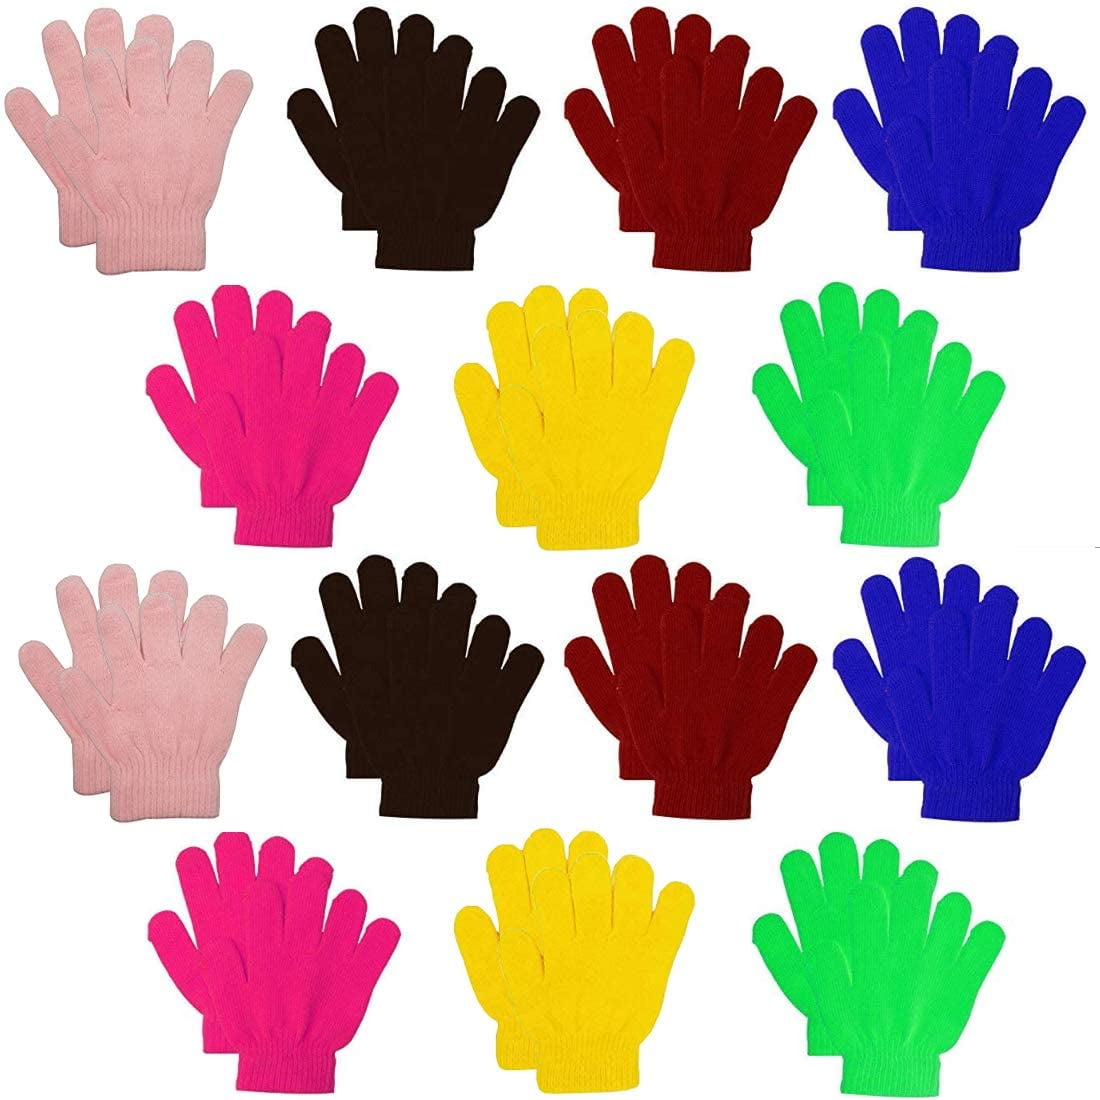 Cooraby 12 Pairs Kids Warm Magic Gloves Teens Winter Stretchy Knit Gloves Boys Girls Knit Gloves 